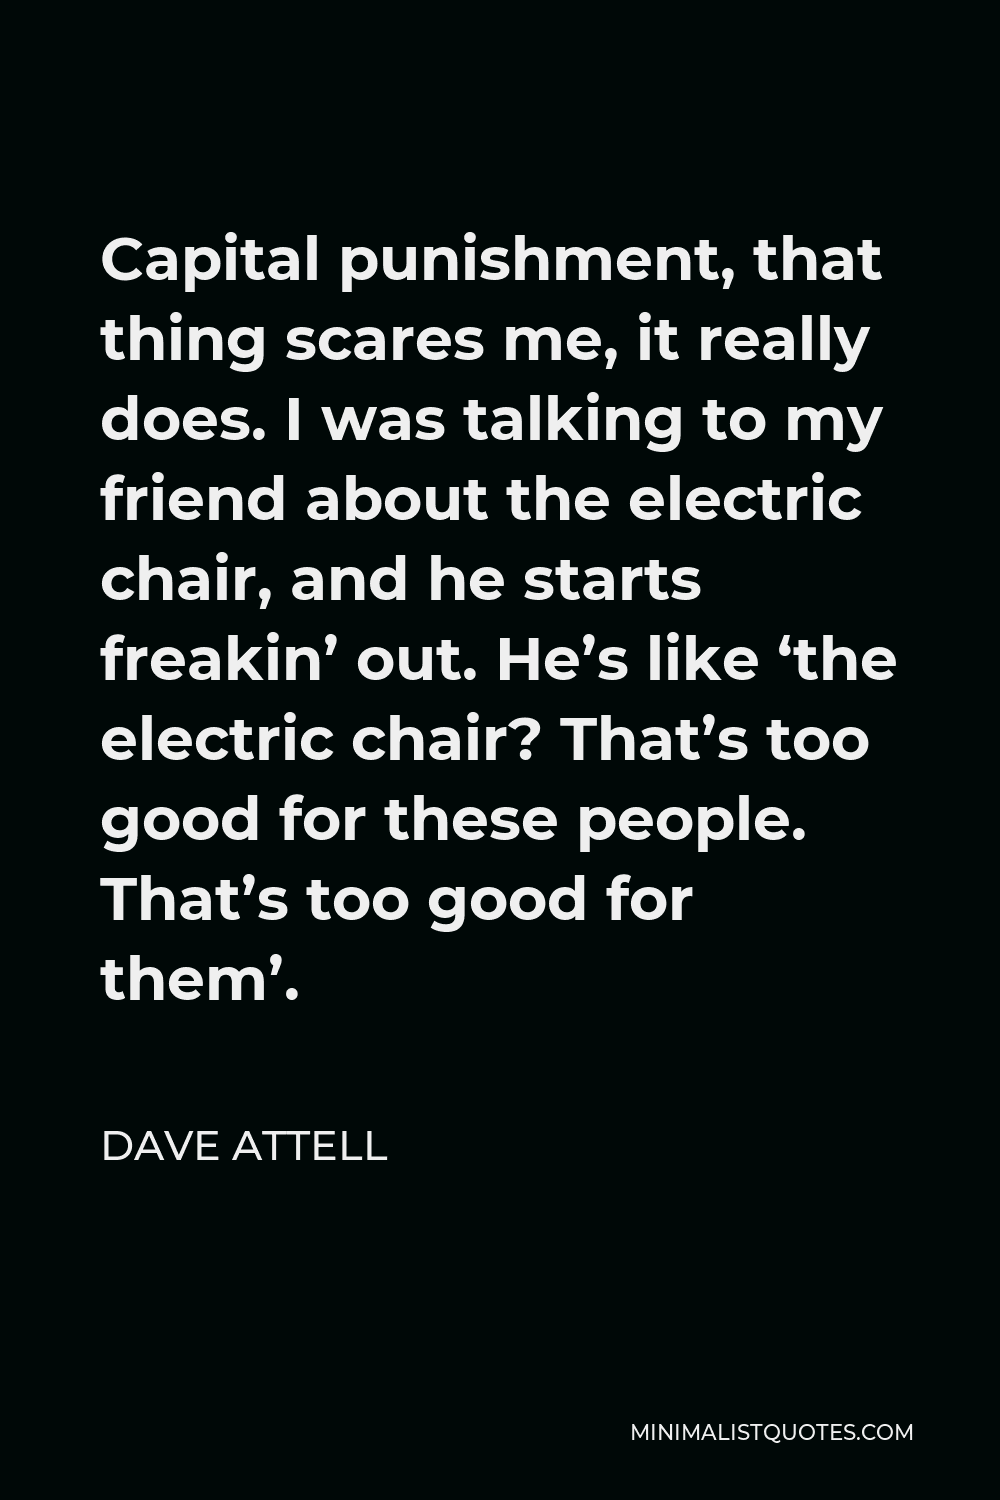 Dave Attell Quote - Capital punishment, that thing scares me, it really does. I was talking to my friend about the electric chair, and he starts freakin’ out. He’s like ‘the electric chair? That’s too good for these people. That’s too good for them’.